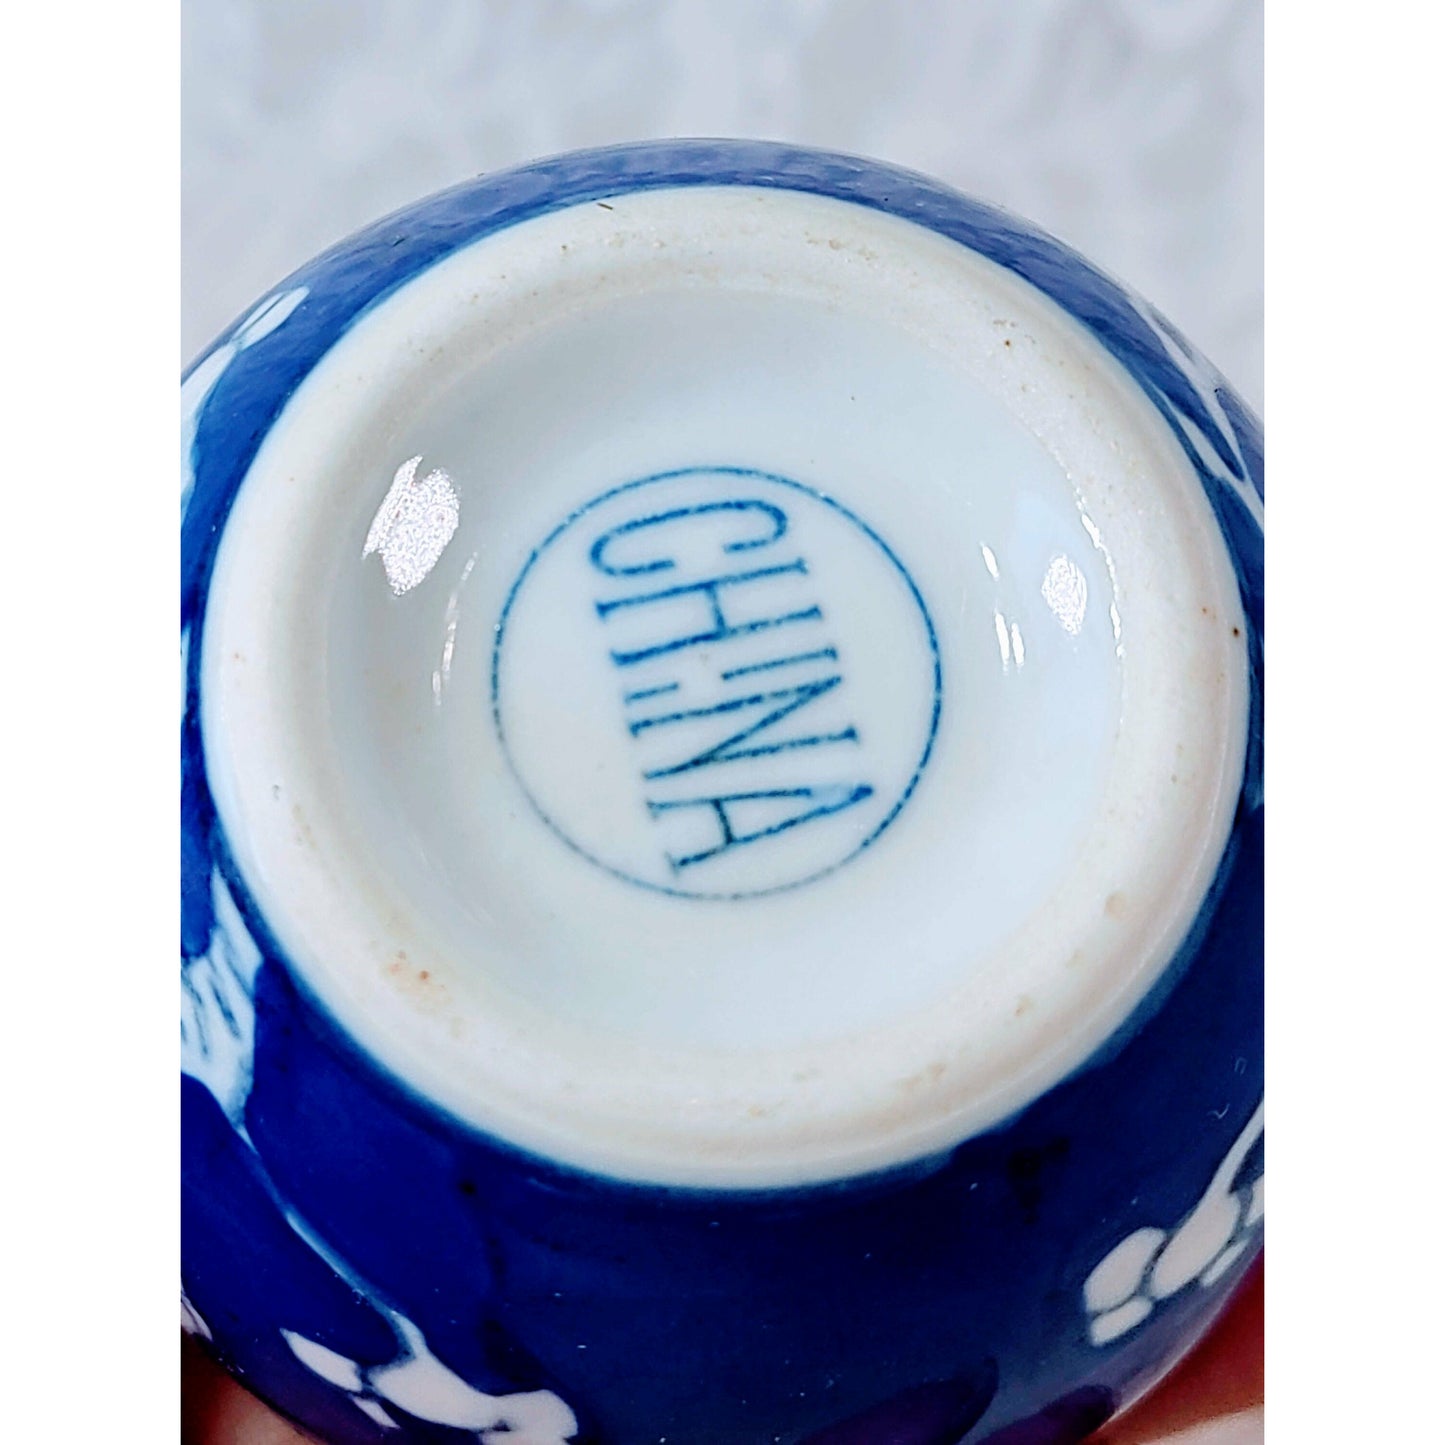 Vintage Porcelain Chinese Ginger Jar with LID ~ Asian ~ Chinese ~ Cobalt Blue and White Prunes Floral Design ~ Marked on Bottom ~ China